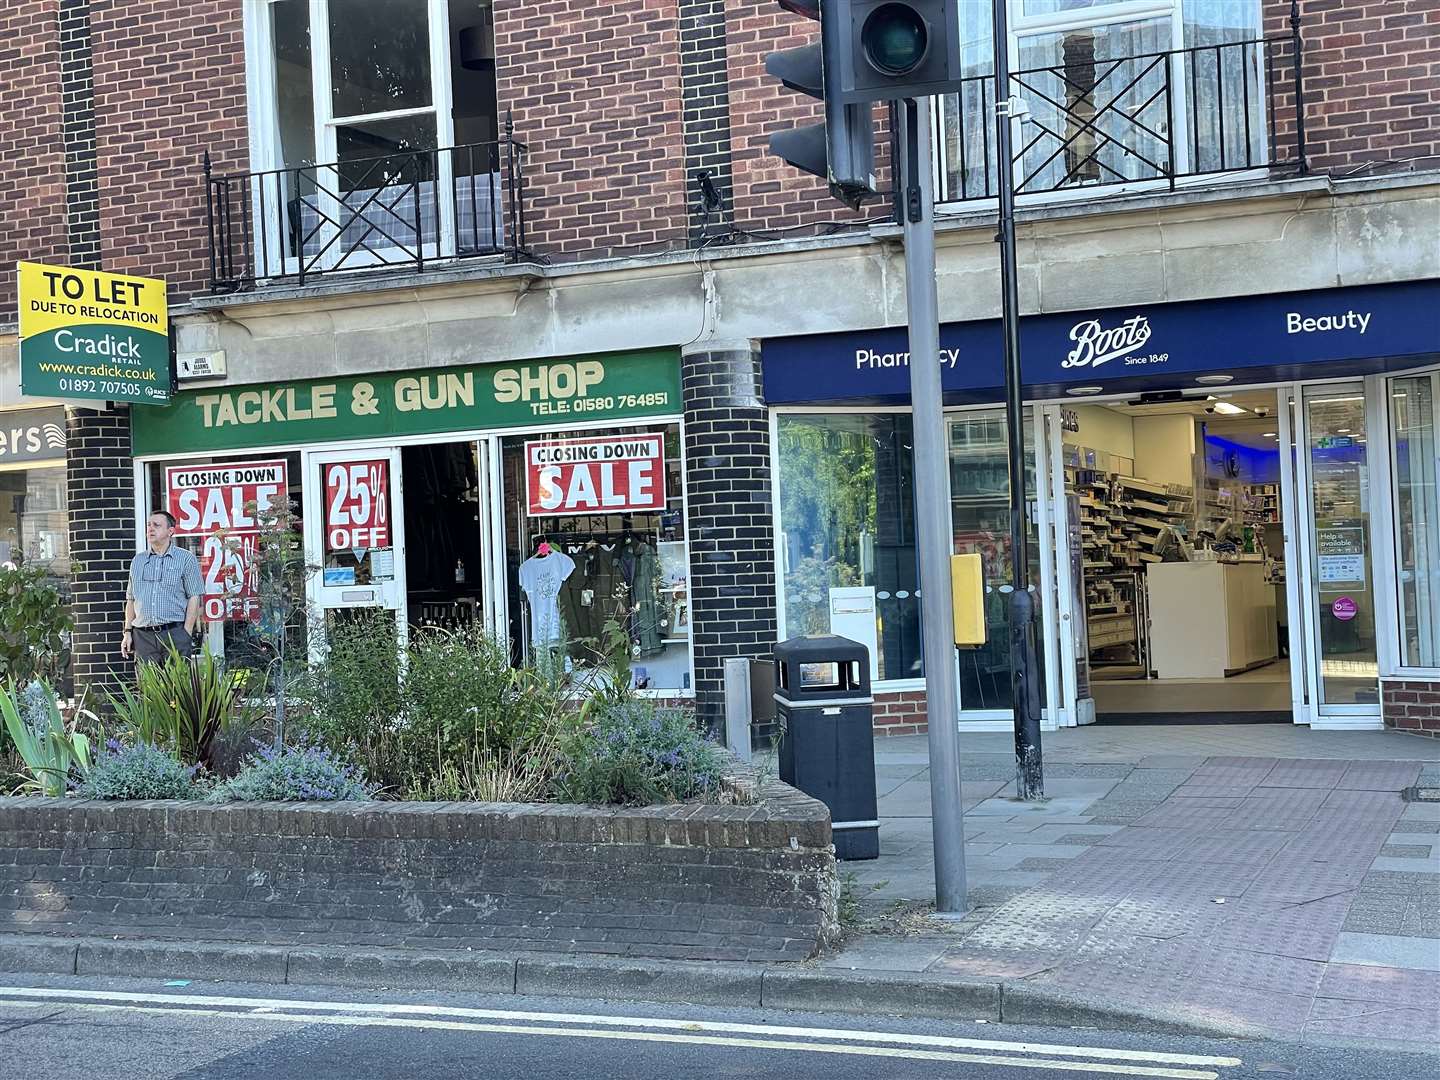 The shop's closure will leave a space next to Boots on the High Street